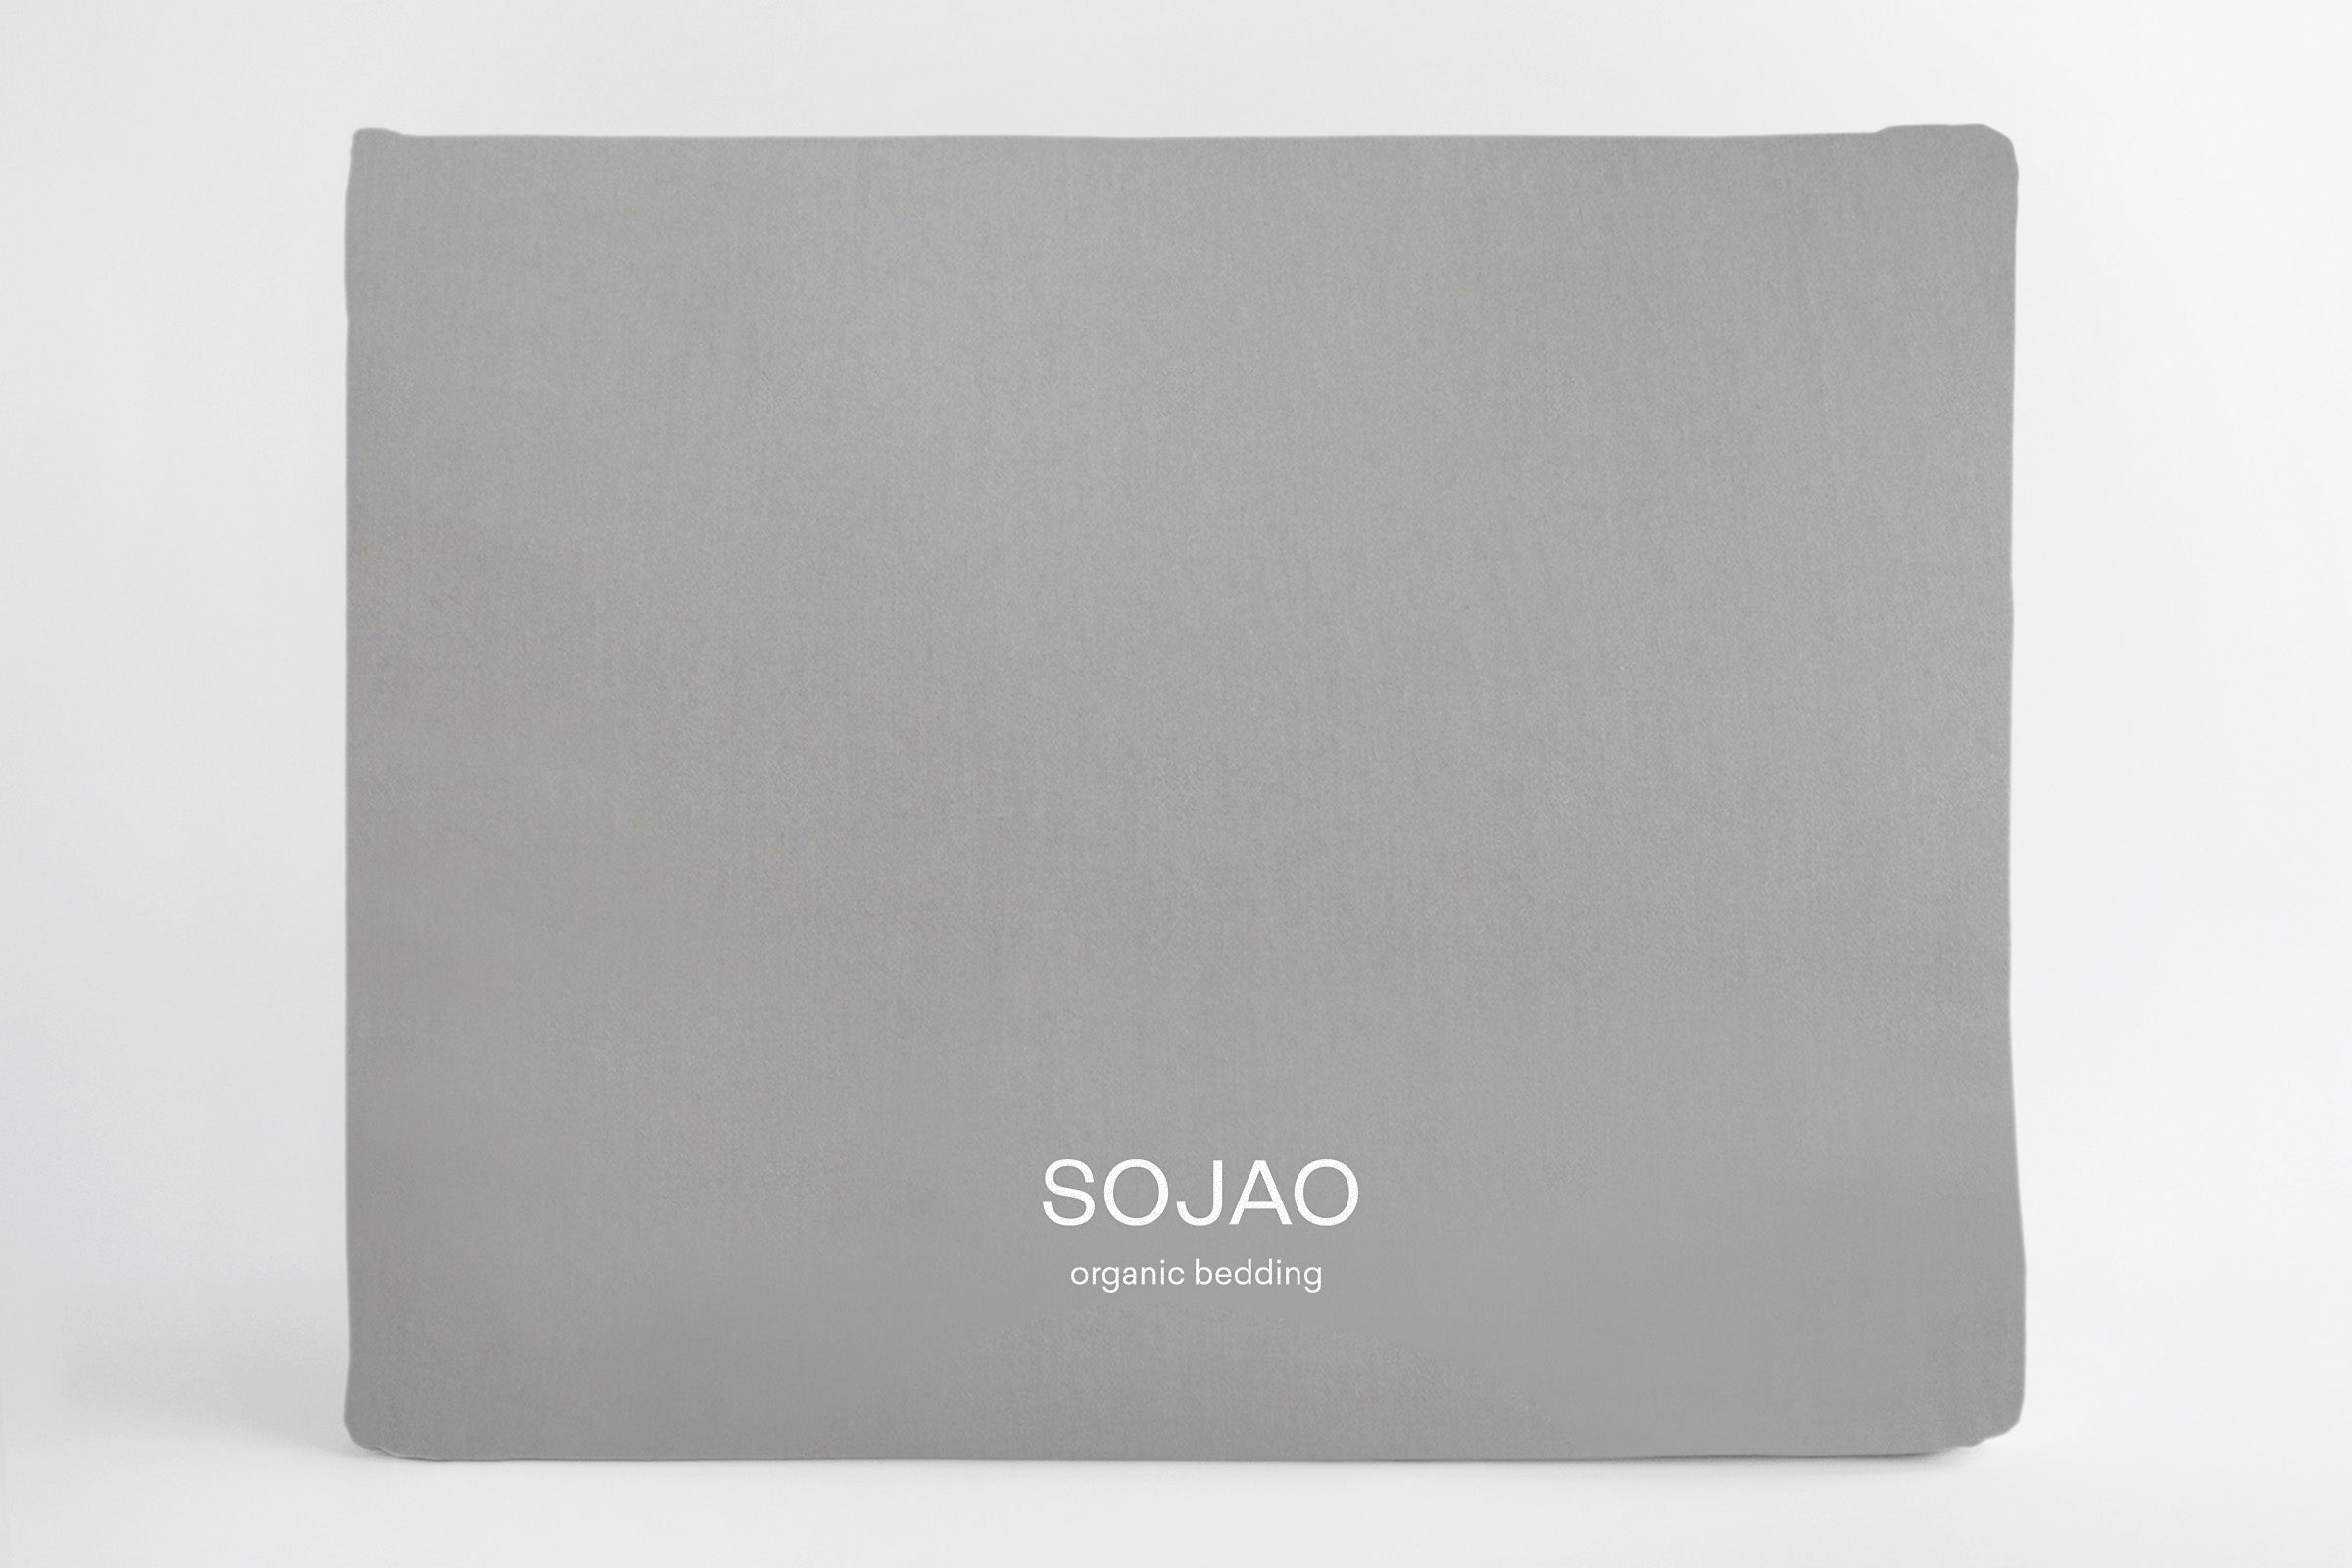 classic-cloud-fitted-sheet-dust-bag-by-sojao.jpg